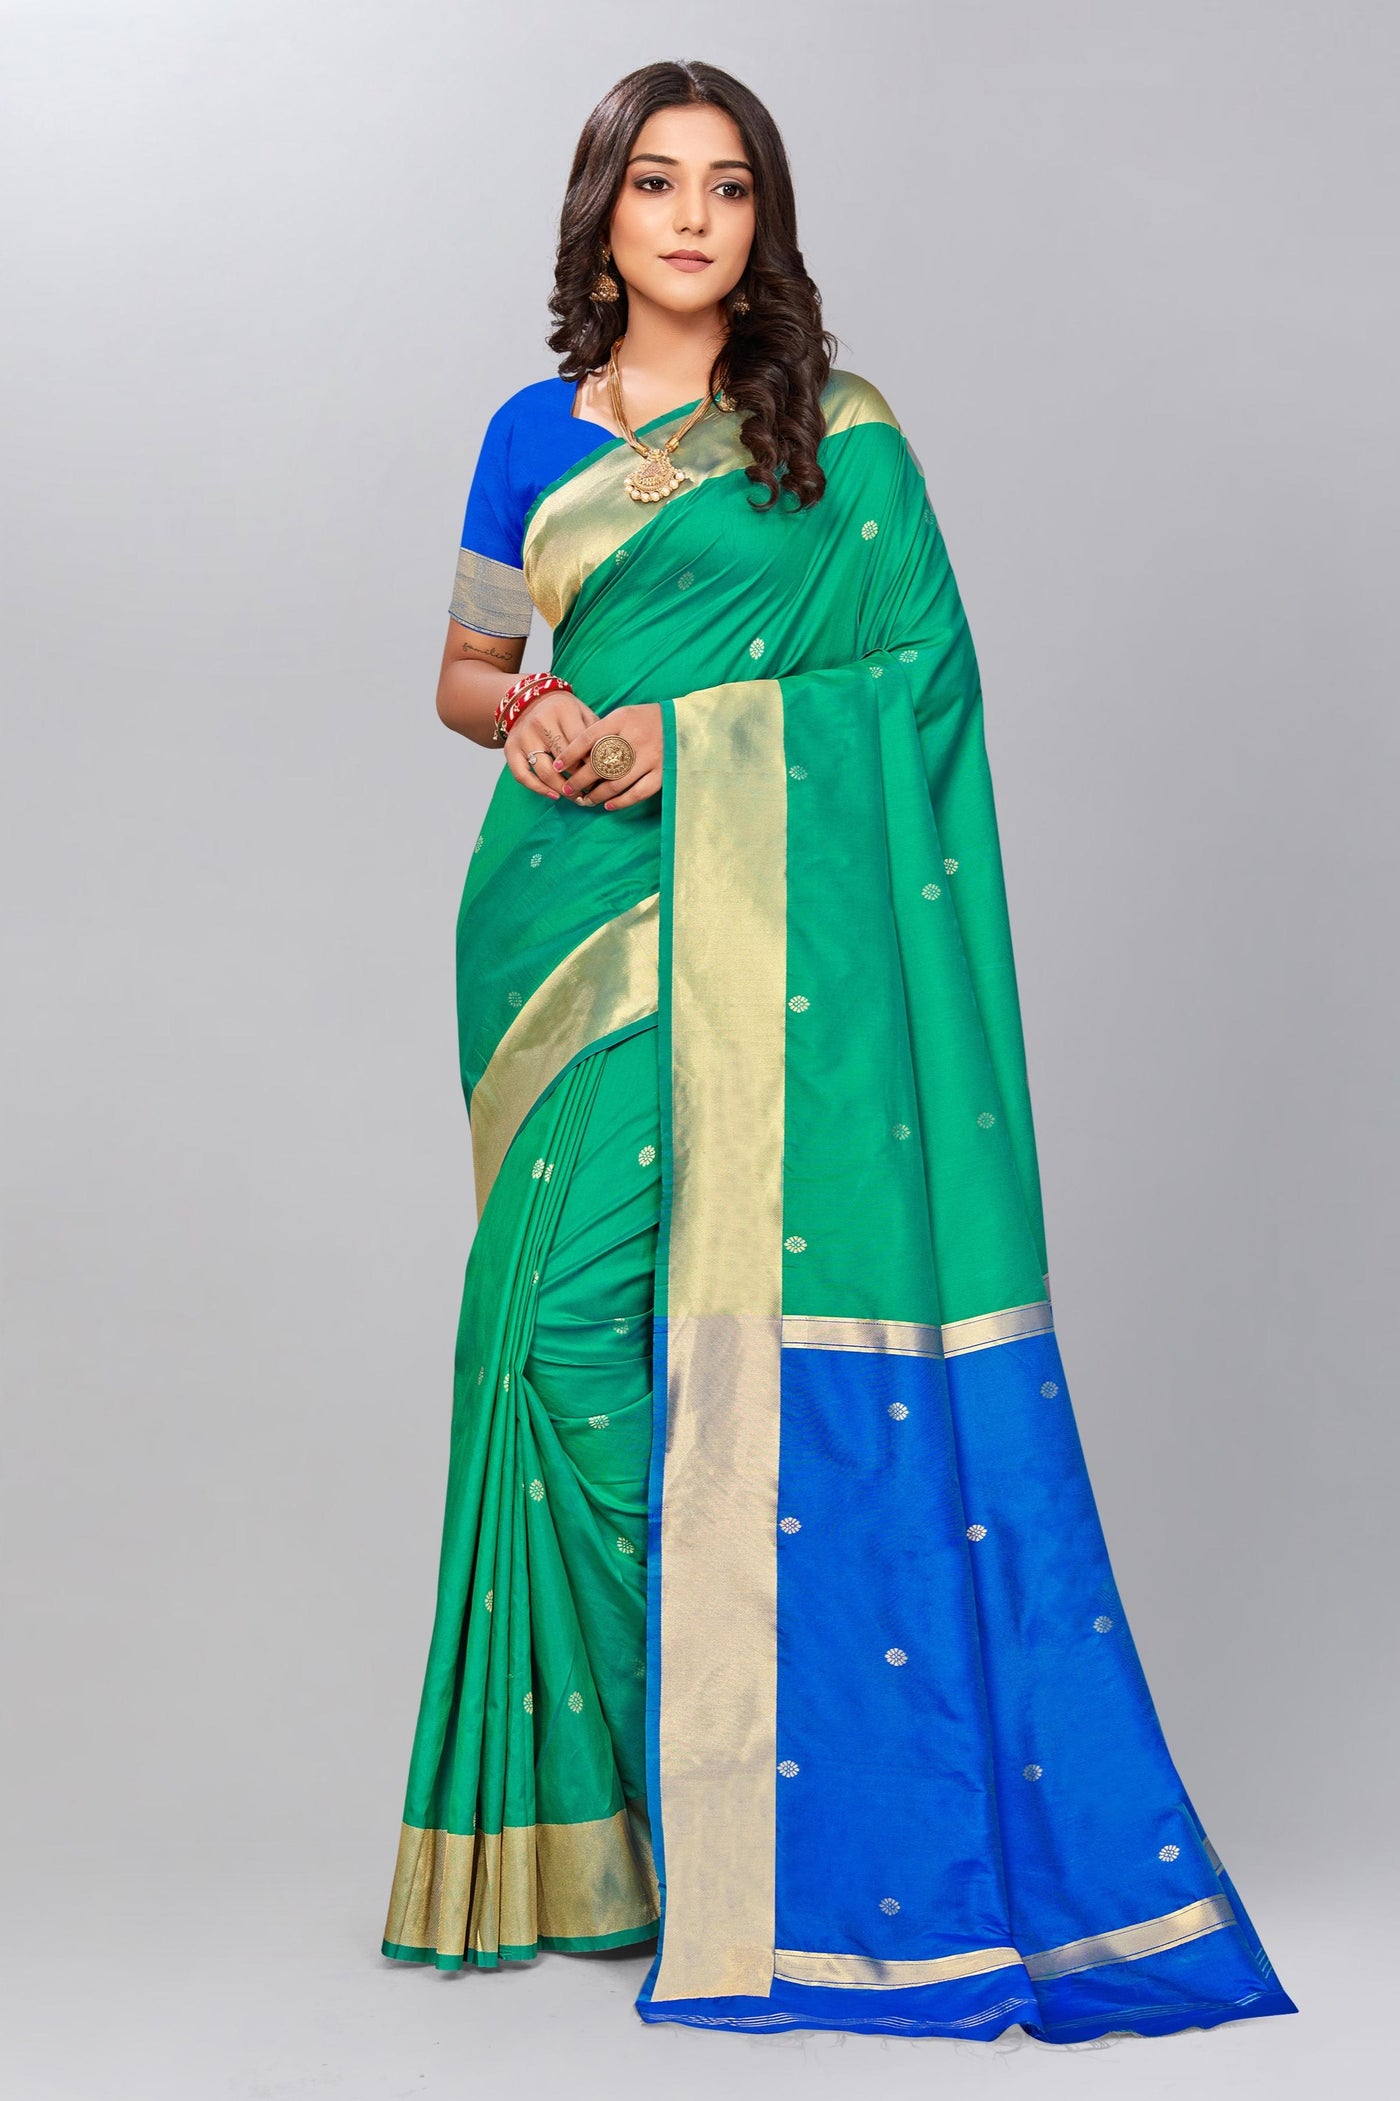 Faux Silk Handloom Saree Indian Clothing in Denver, CO, Aurora, CO, Boulder, CO, Fort Collins, CO, Colorado Springs, CO, Parker, CO, Highlands Ranch, CO, Cherry Creek, CO, Centennial, CO, and Longmont, CO. NATIONWIDE SHIPPING USA- India Fashion X